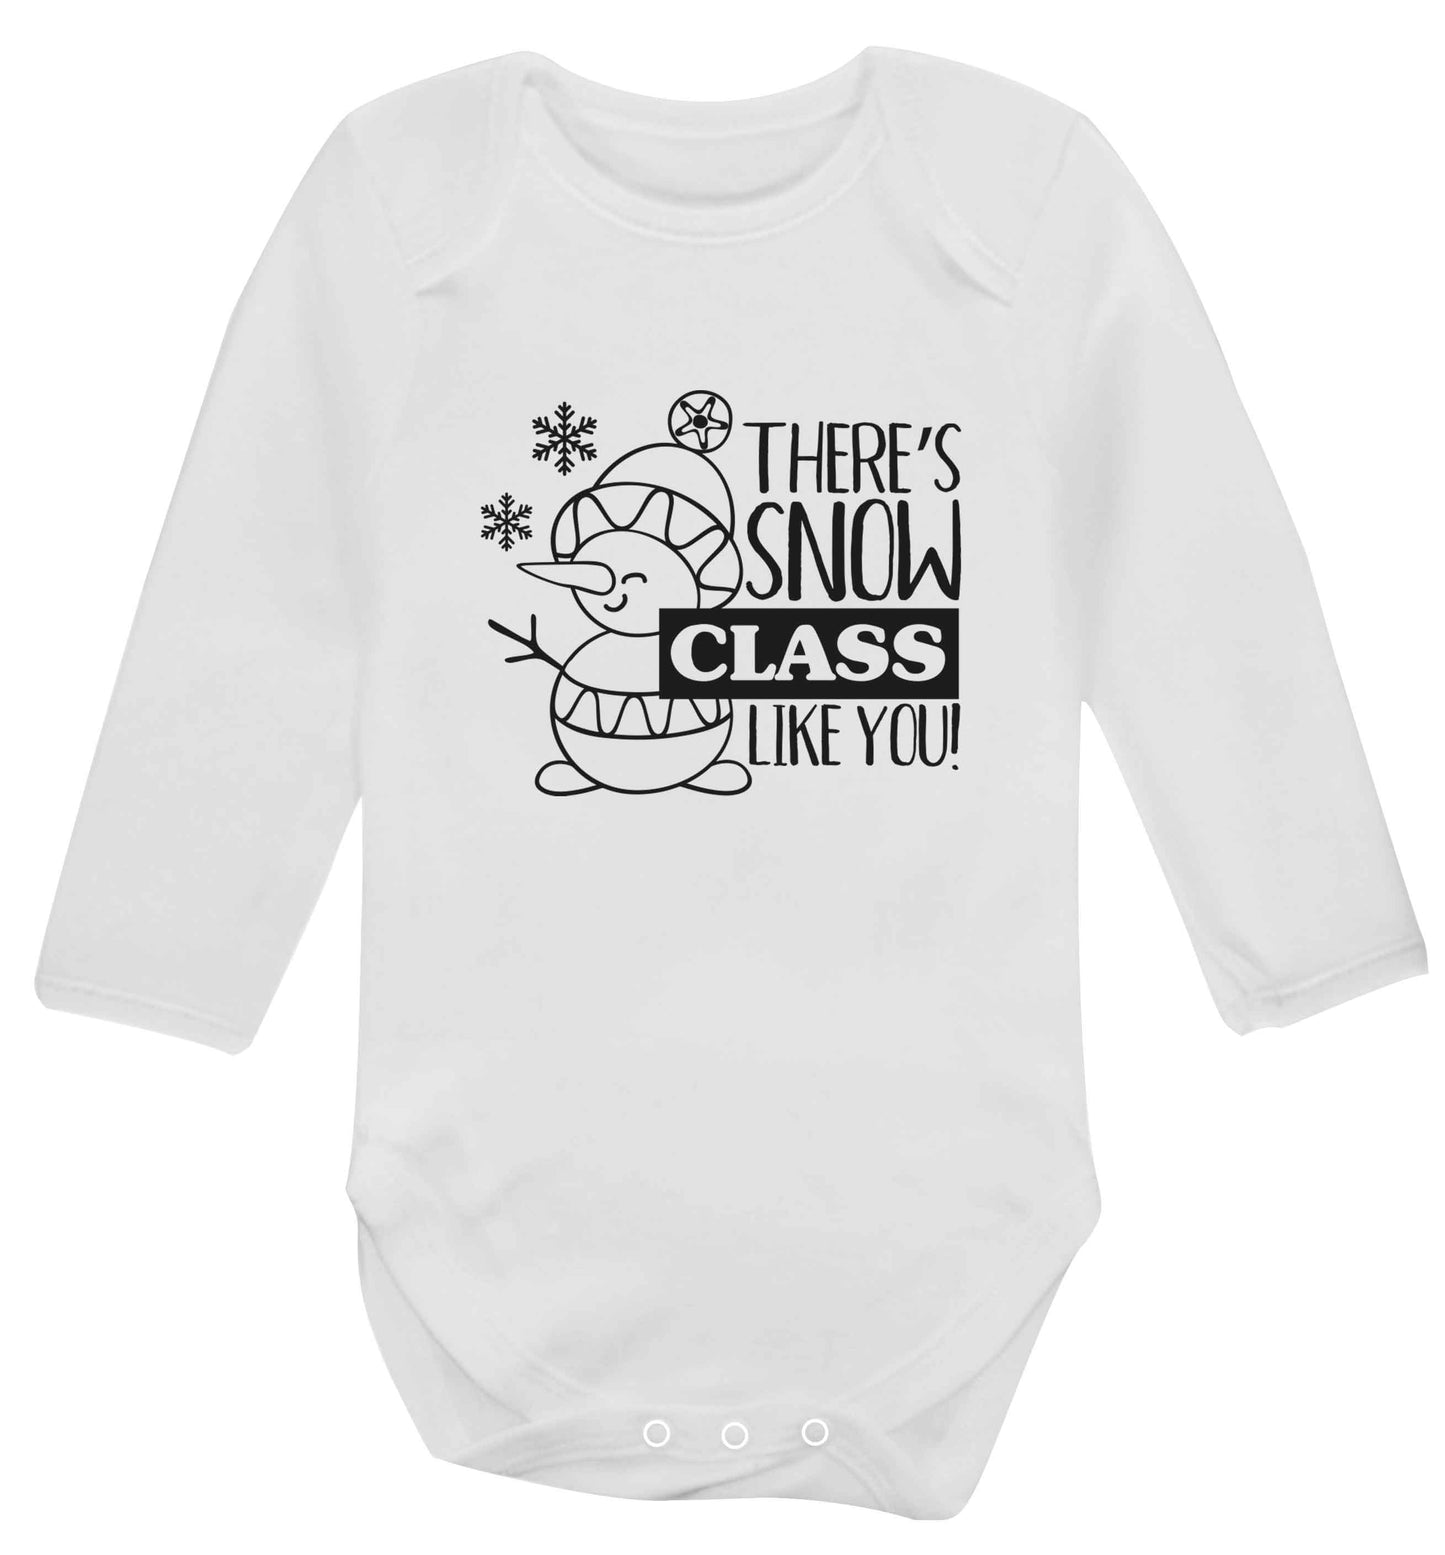 There's snow class like you baby vest long sleeved white 6-12 months